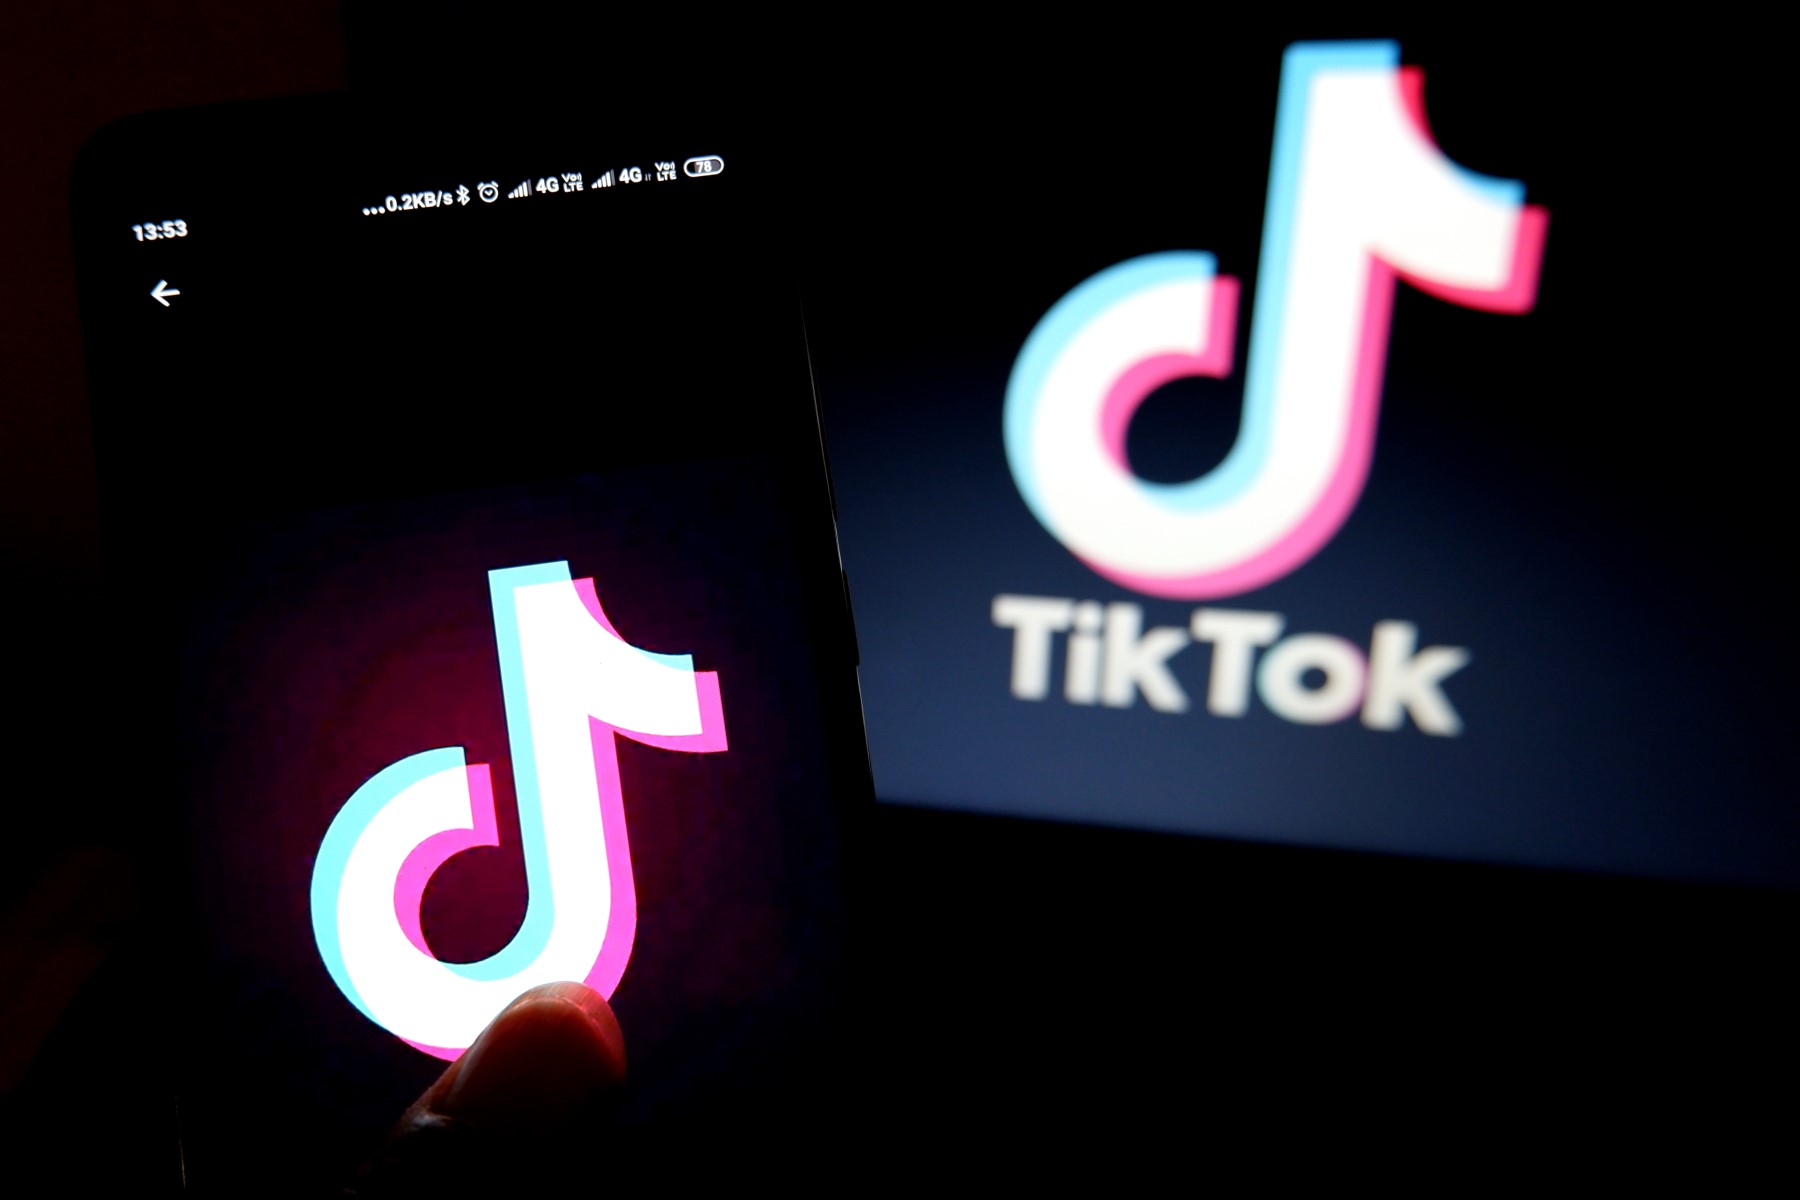 can you do a face reveal please｜TikTok Search